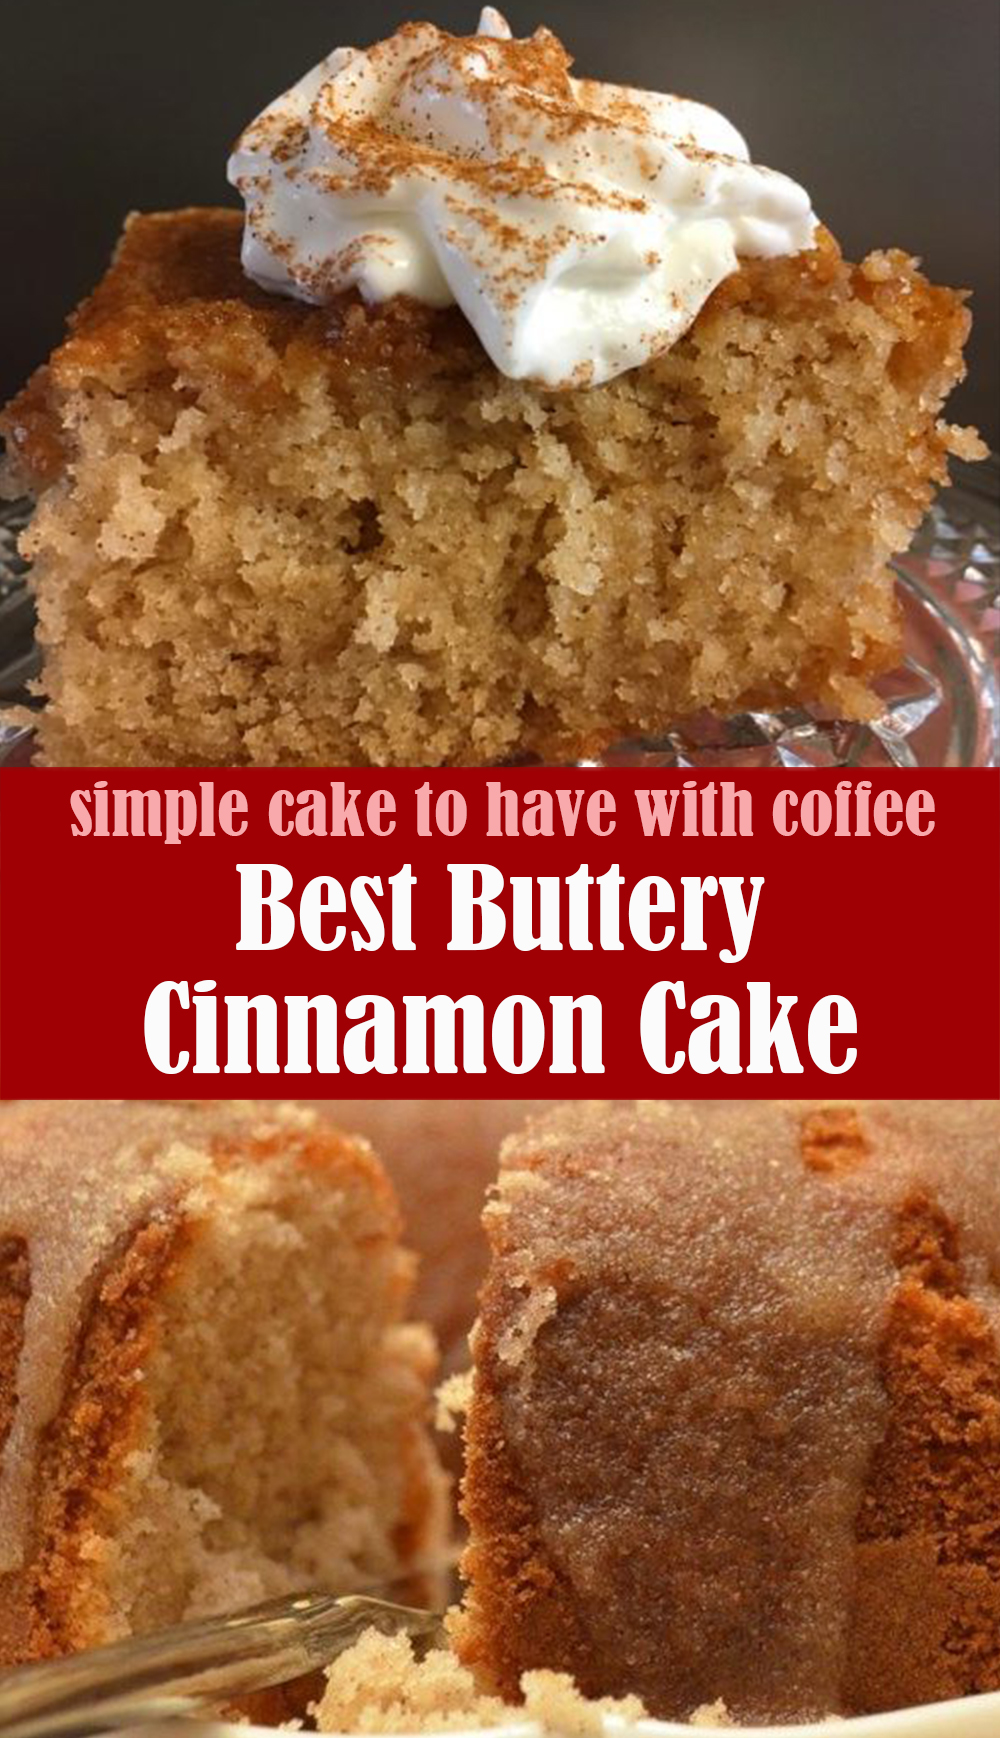 Buttery and Delicious Cinnamon Cake